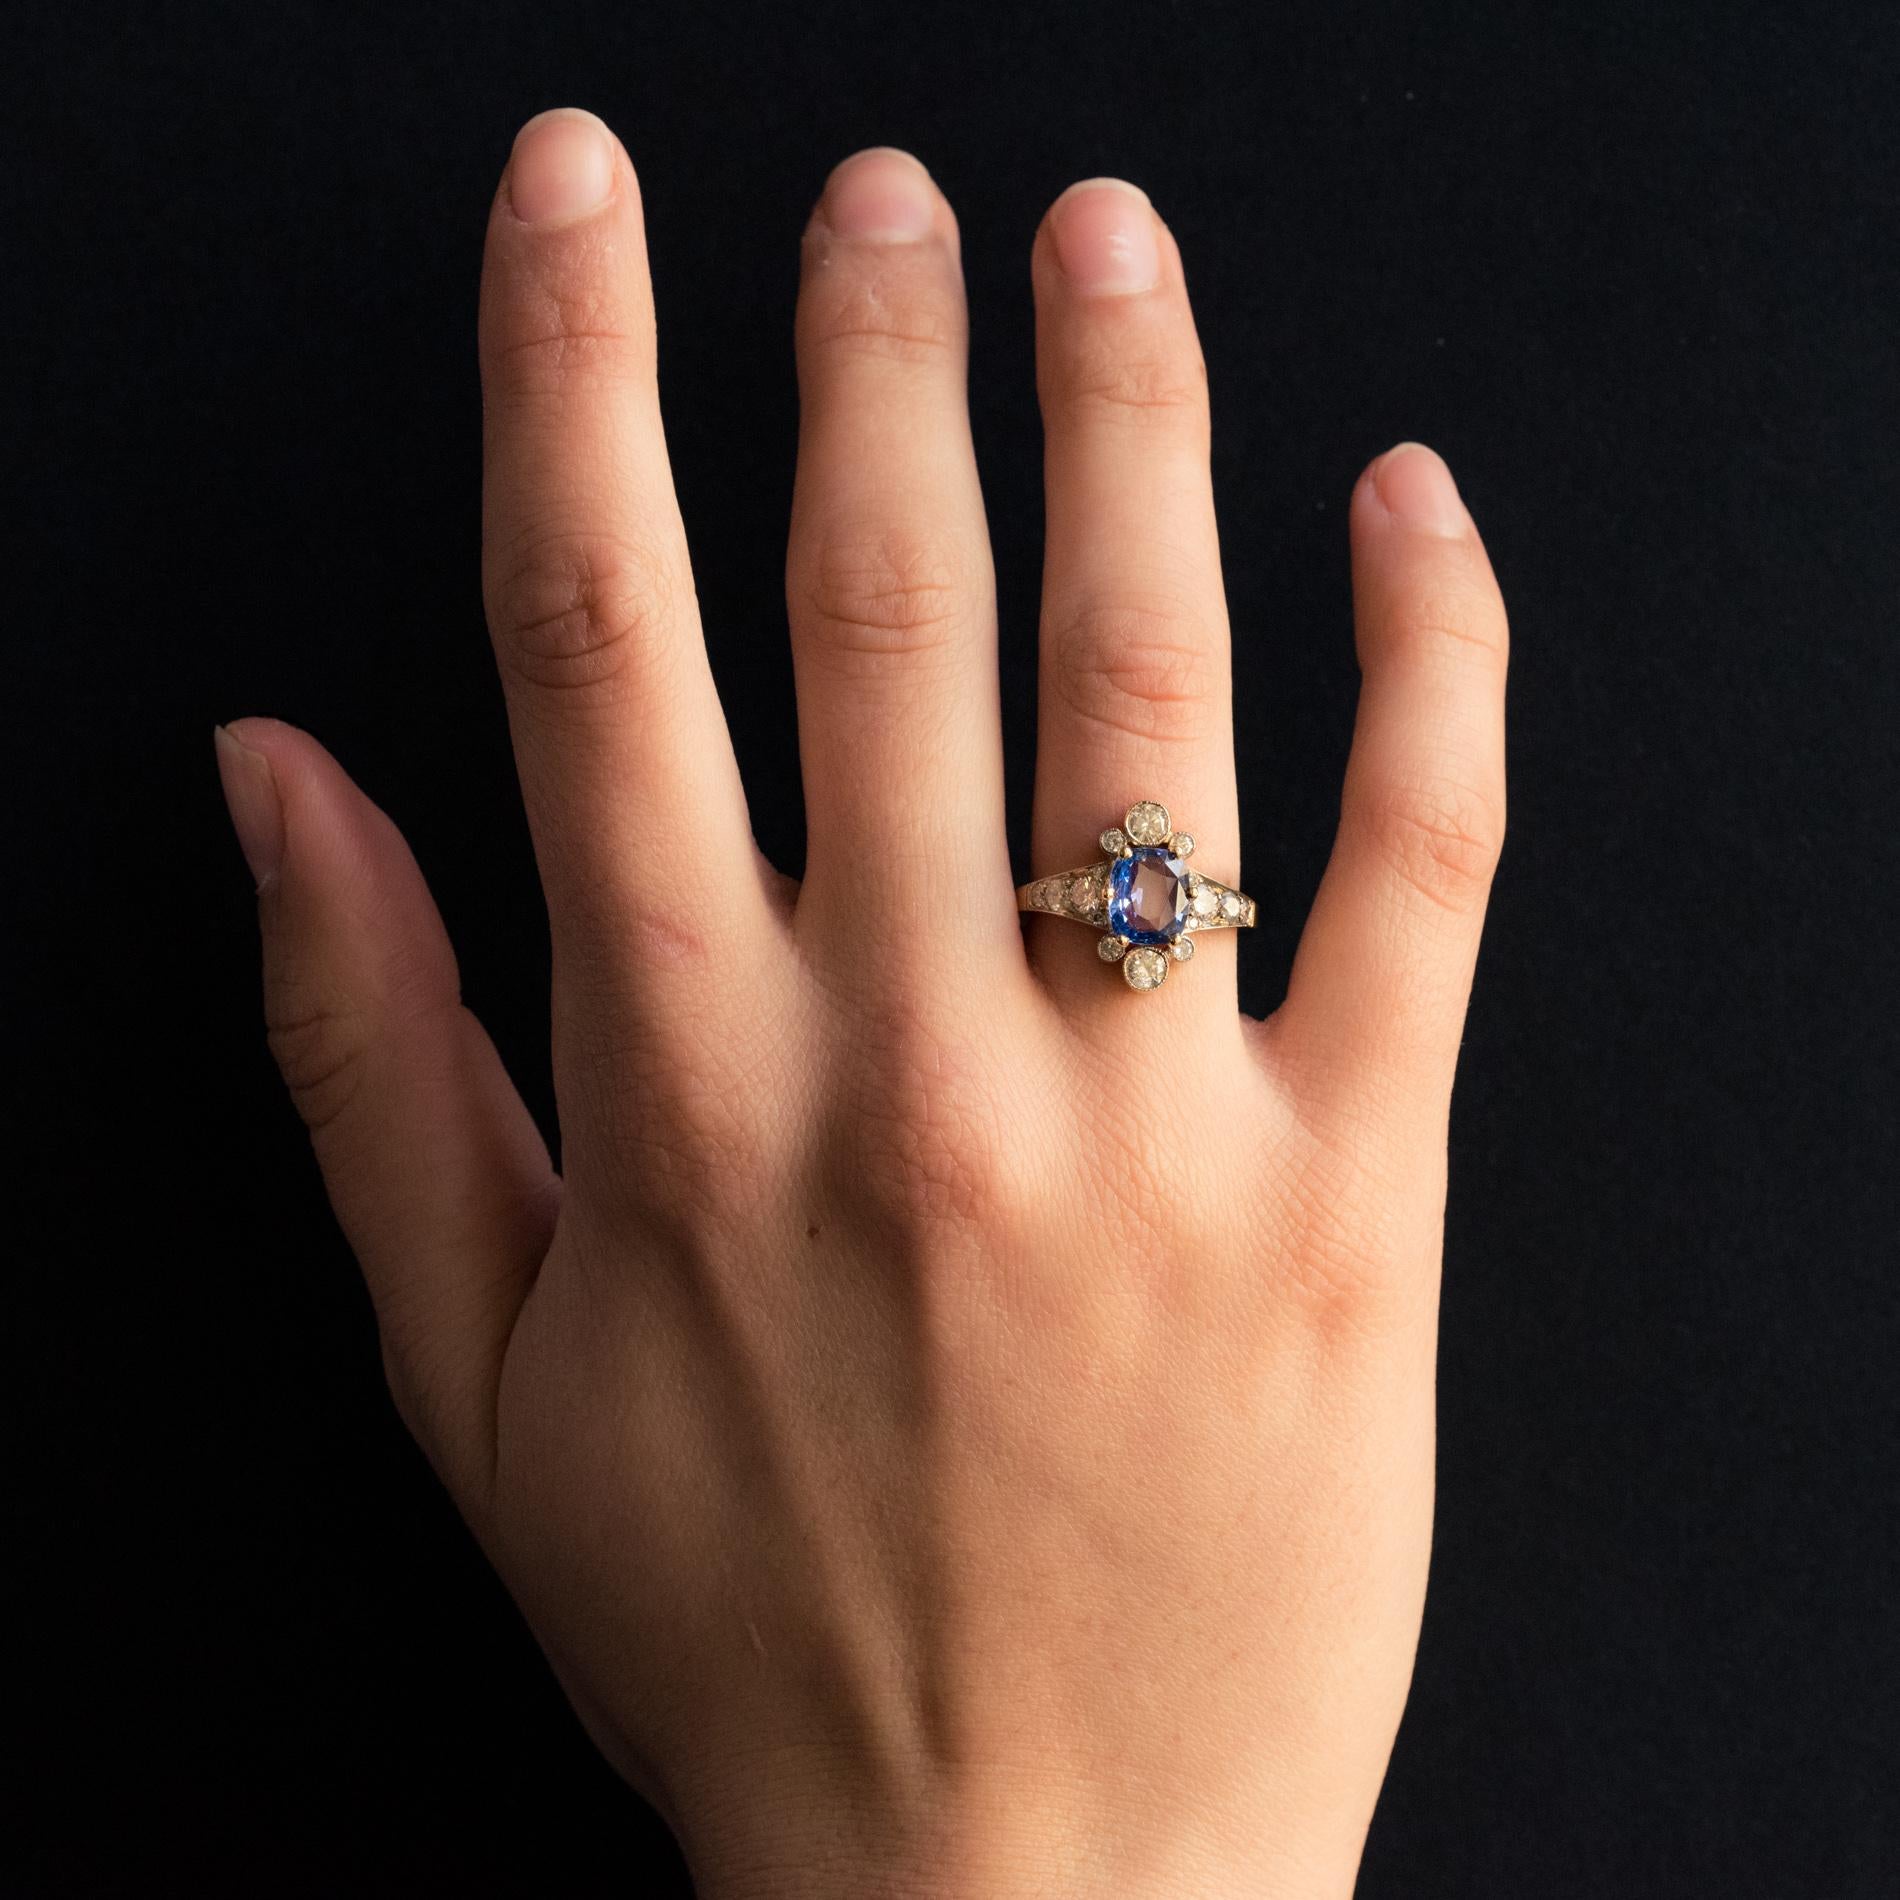 Ring in 18 karat yellow gold, eagle's head hallmark.
Adorned with a lavender blue cushion-cut sapphire, this lovely ring is set with 6 claws with on its top and at the base of 2 x 3 modern brilliant-cut diamonds in millegrain settings. On both